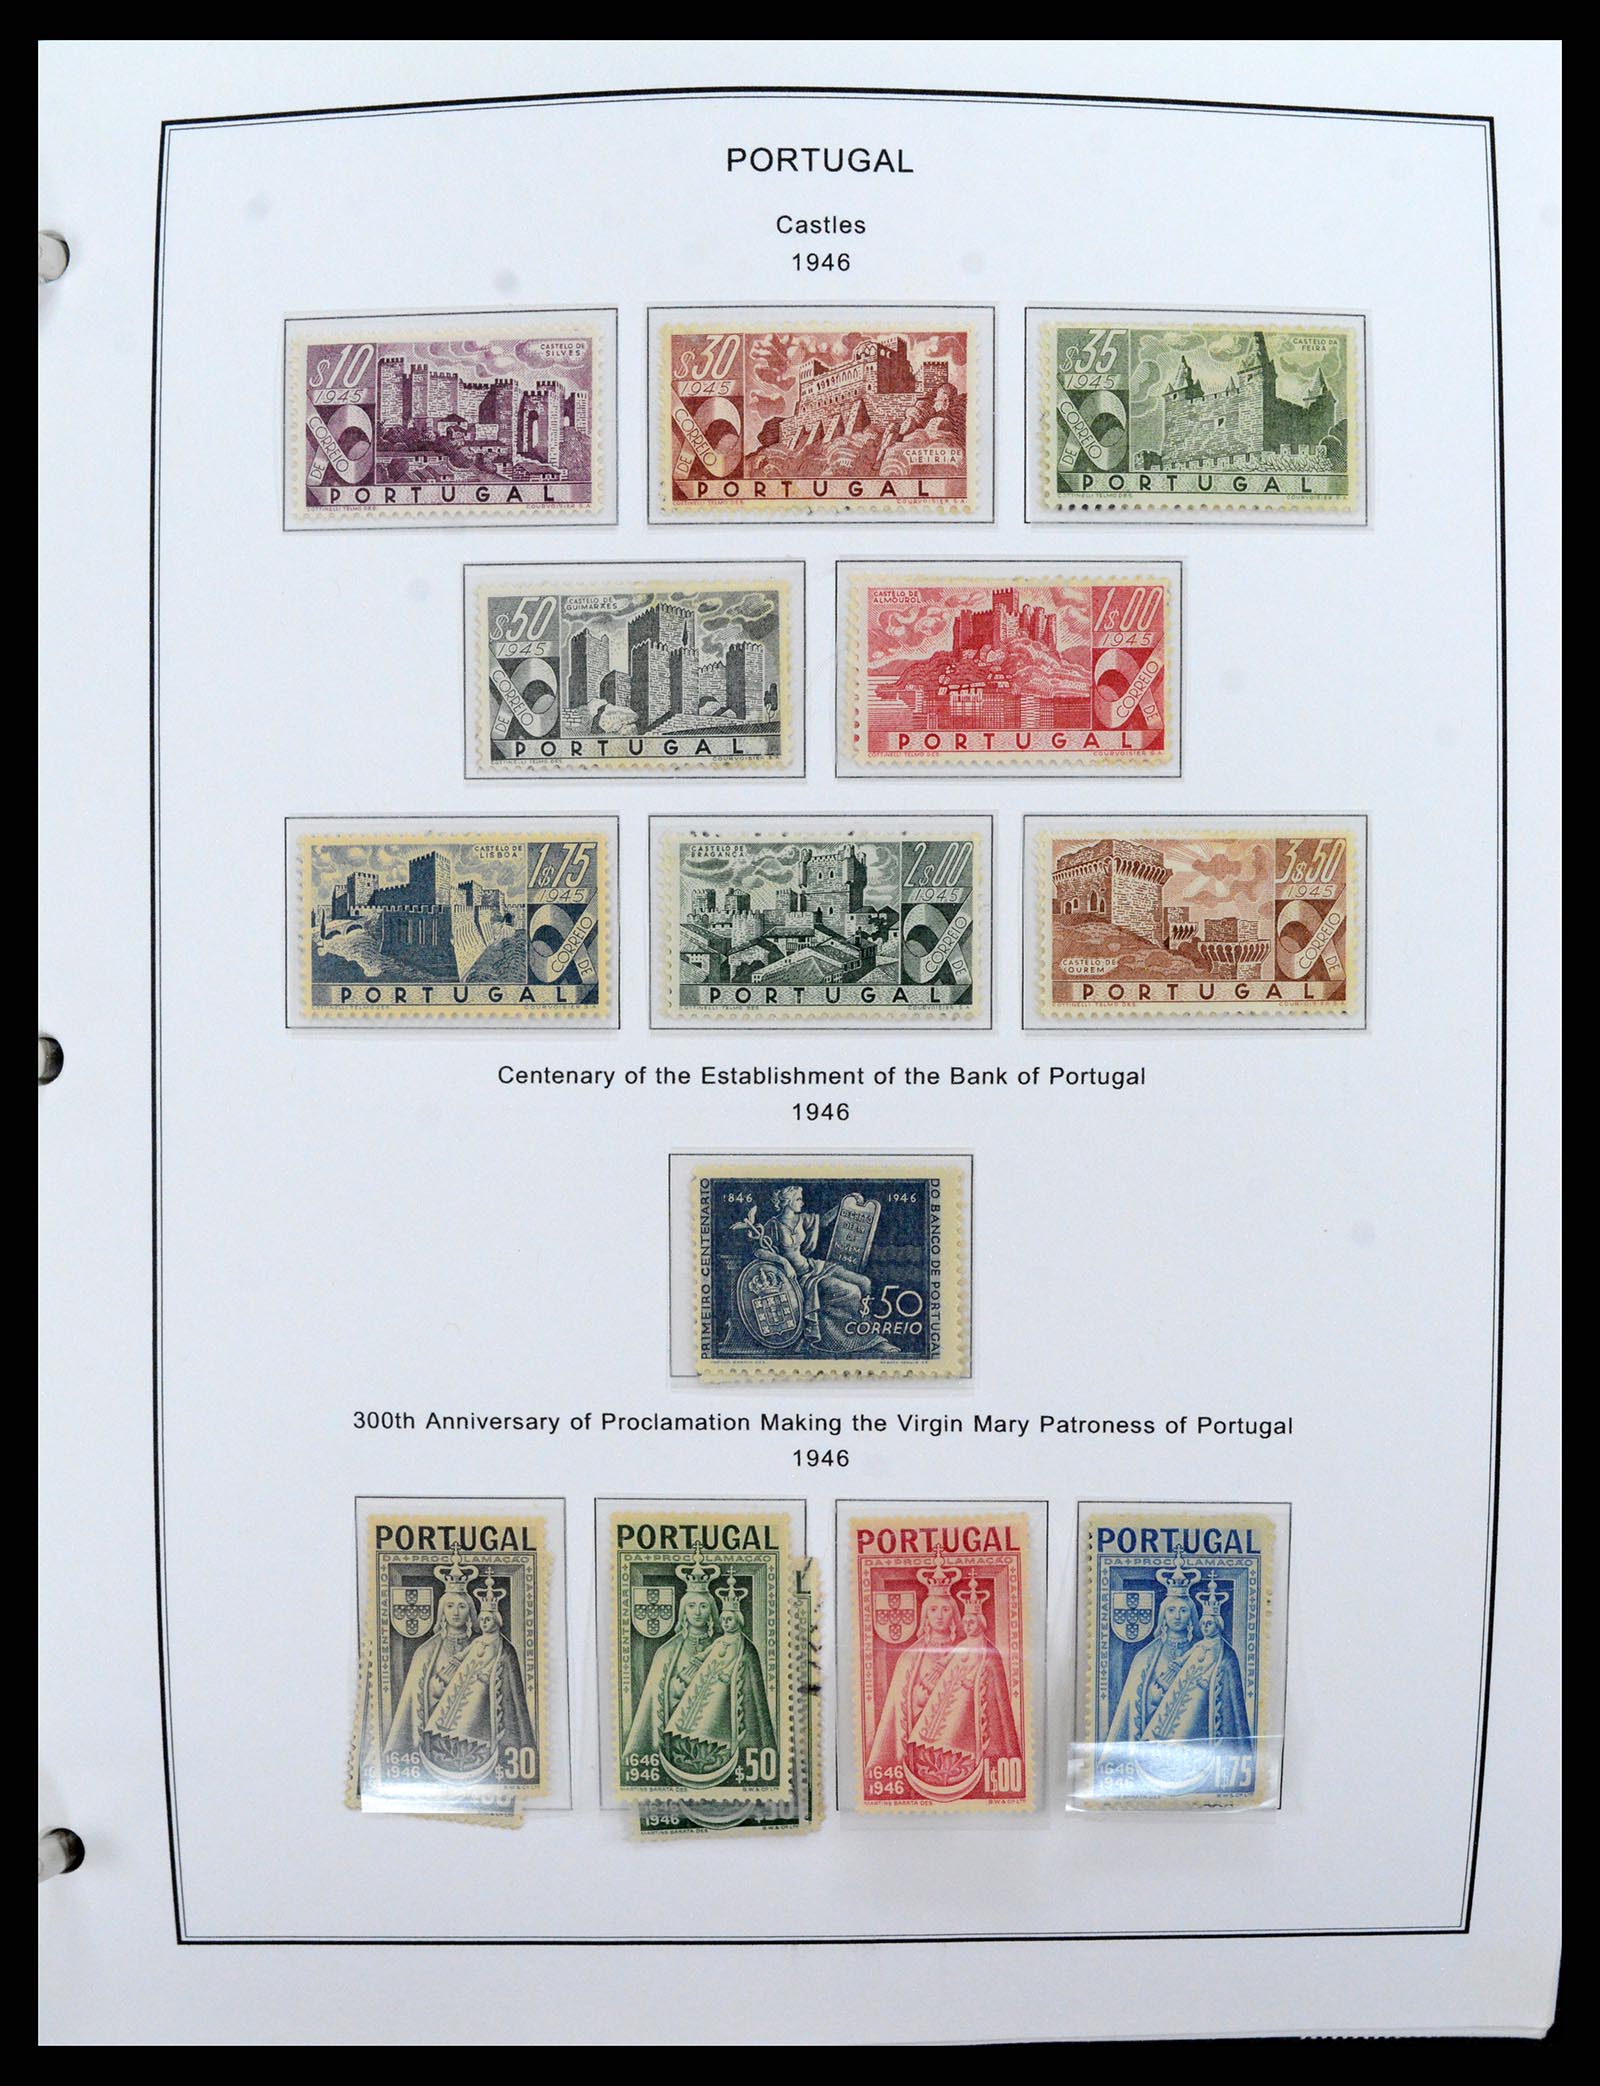 37767 043 - Stamp collection 37767 Portugal and colonies 1853-1990.